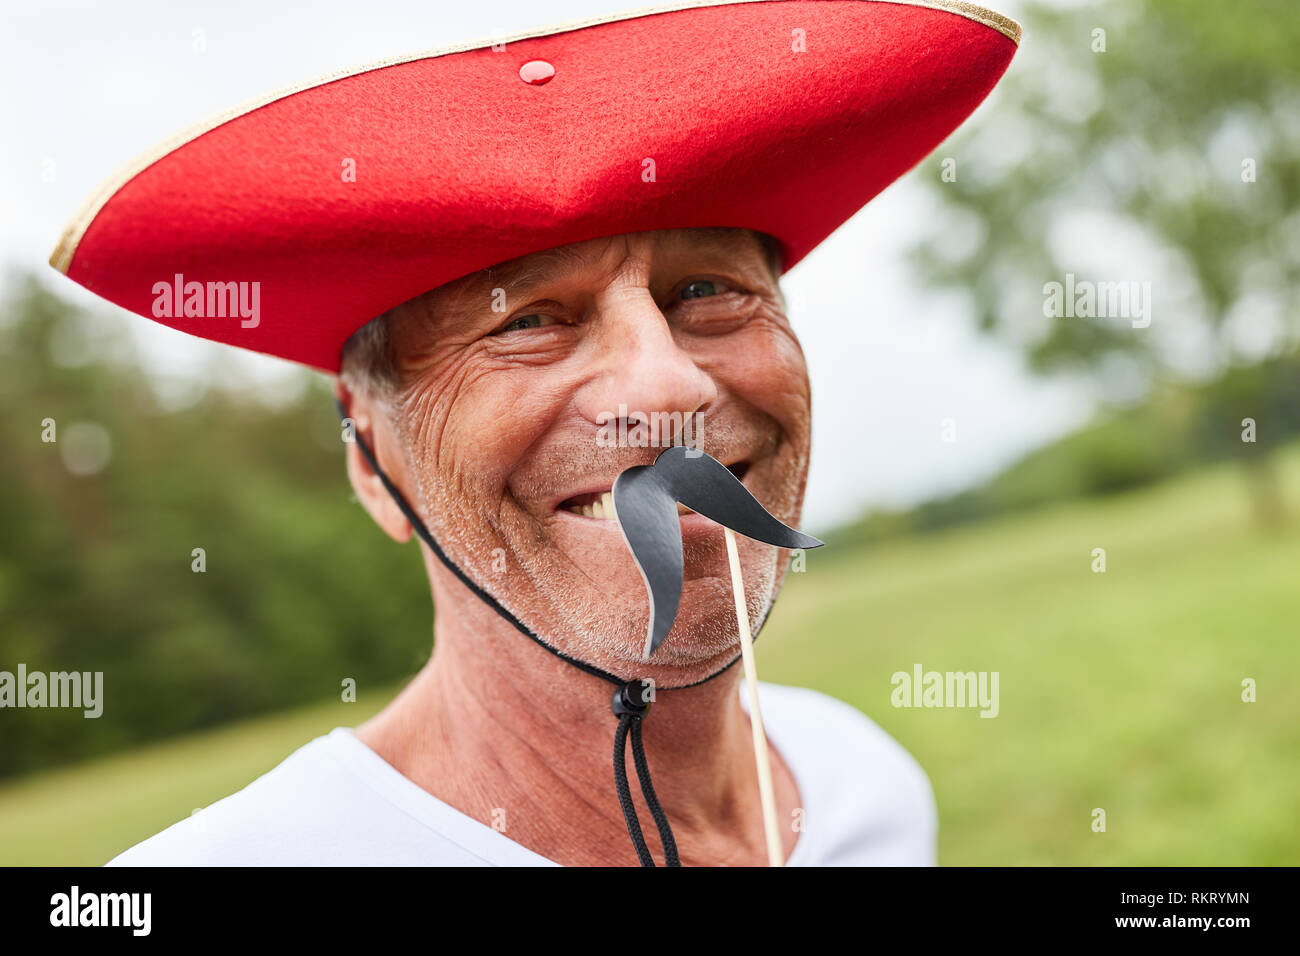 Senior man at a masquerade ball or carnival with red hat and beard Stock Photo